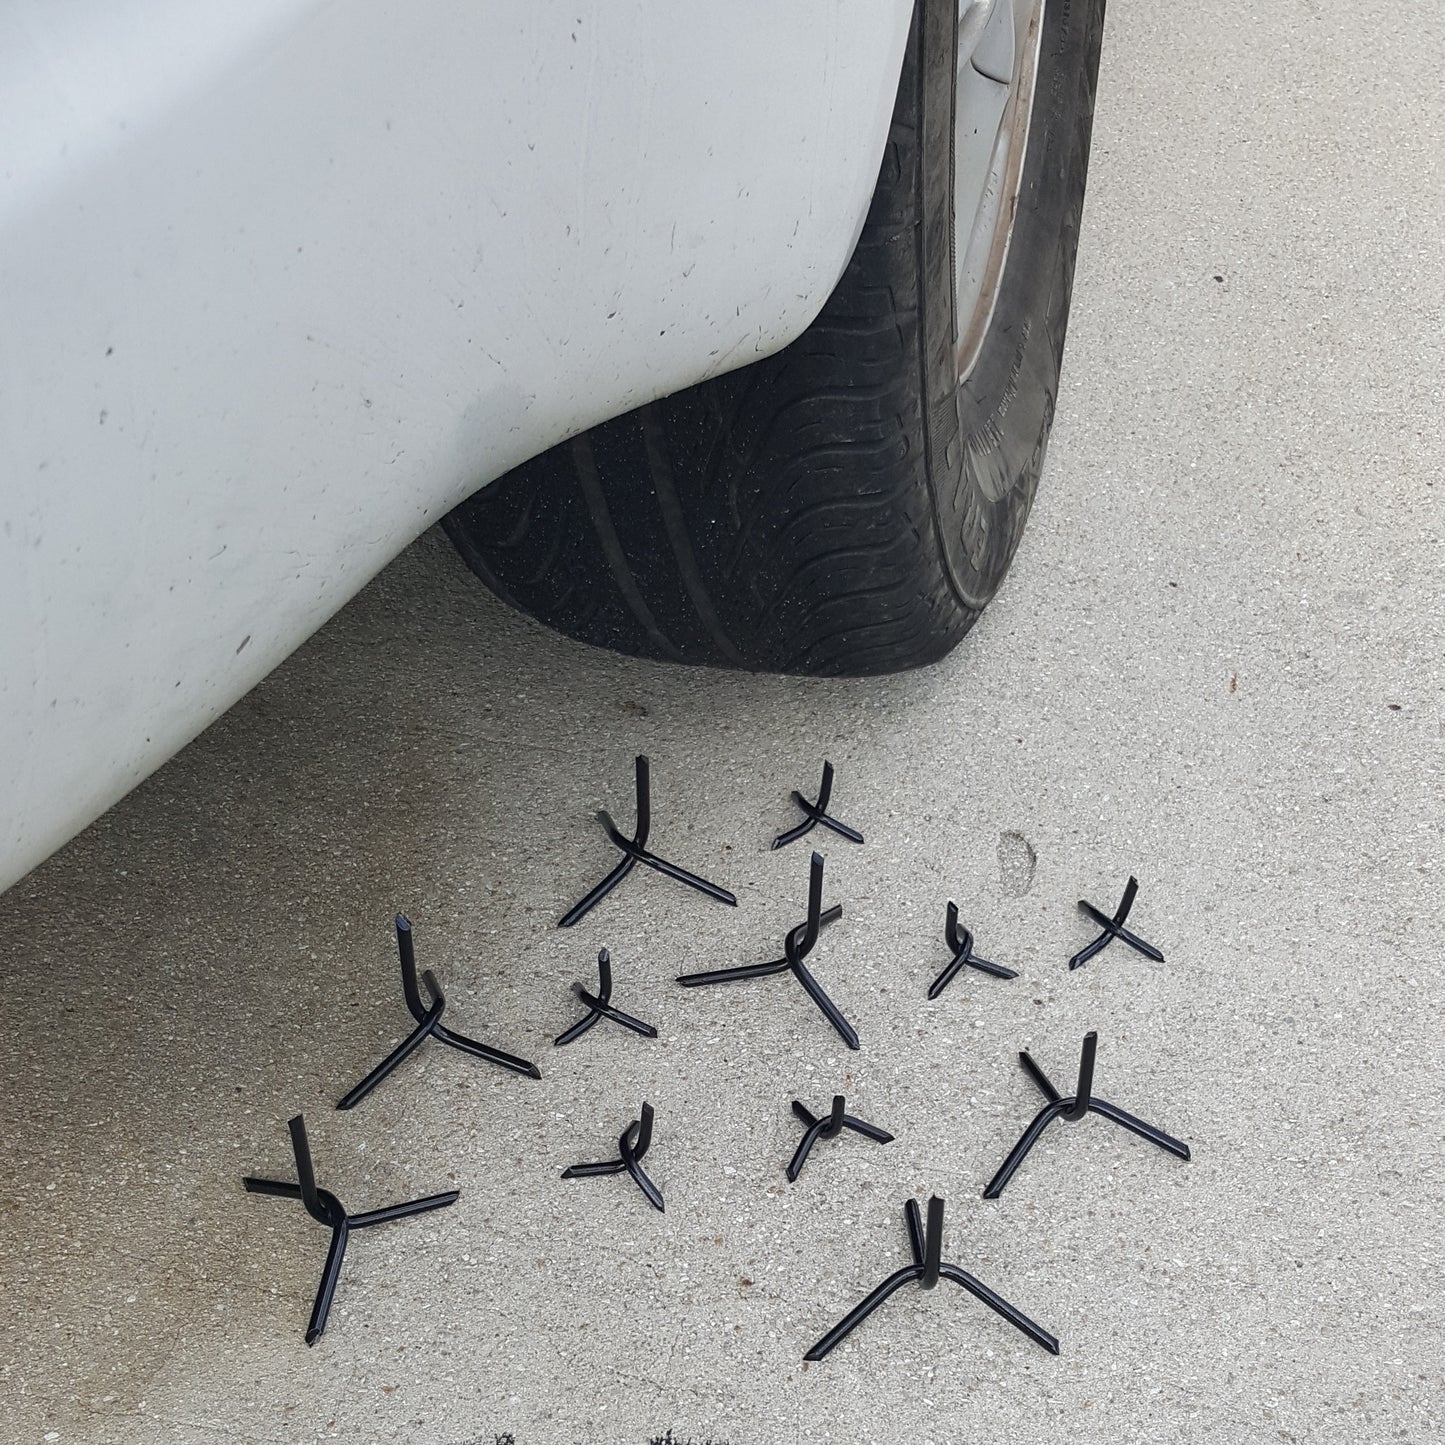 10 Large + 10 Small caltrops any color and save $15